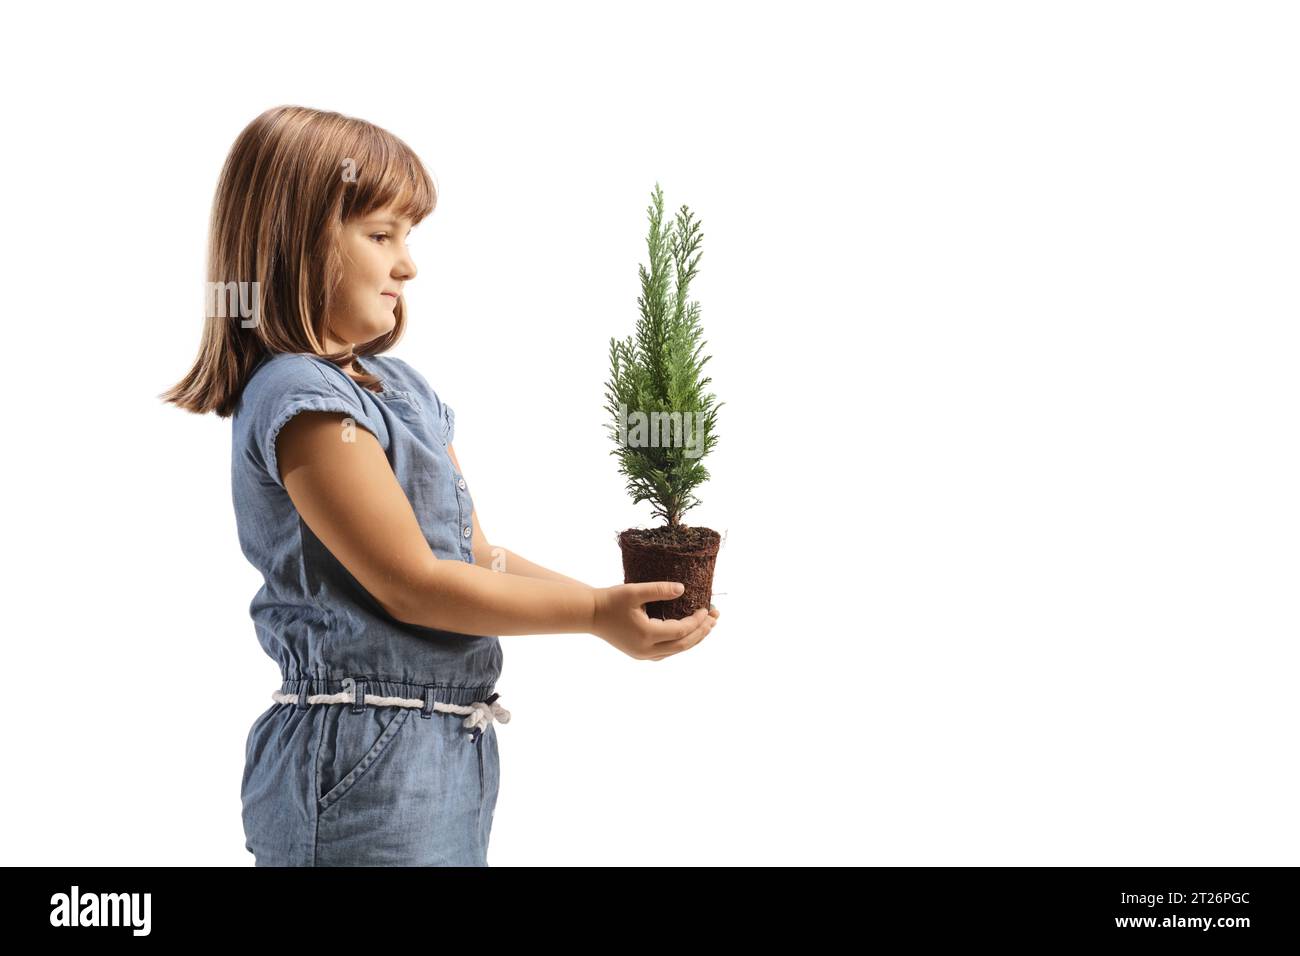 Profile shot of a little girl holding a small evergreen tree pot isolated on white background Stock Photo